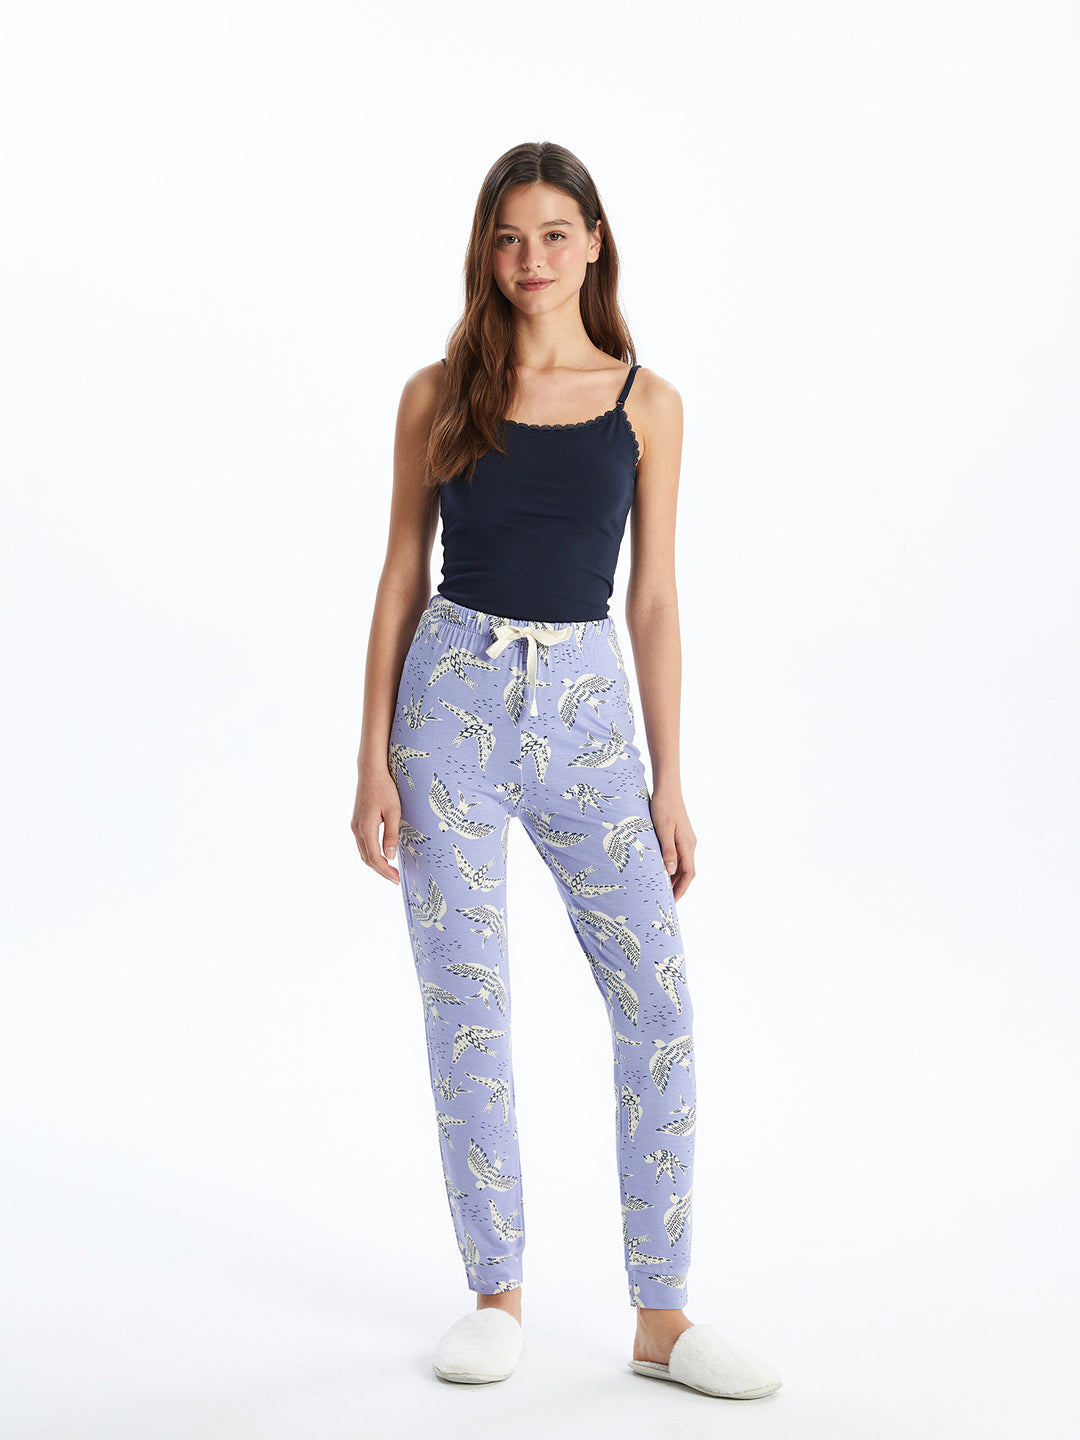 Patterned Women Pajama Bottoms With Elastic Waist